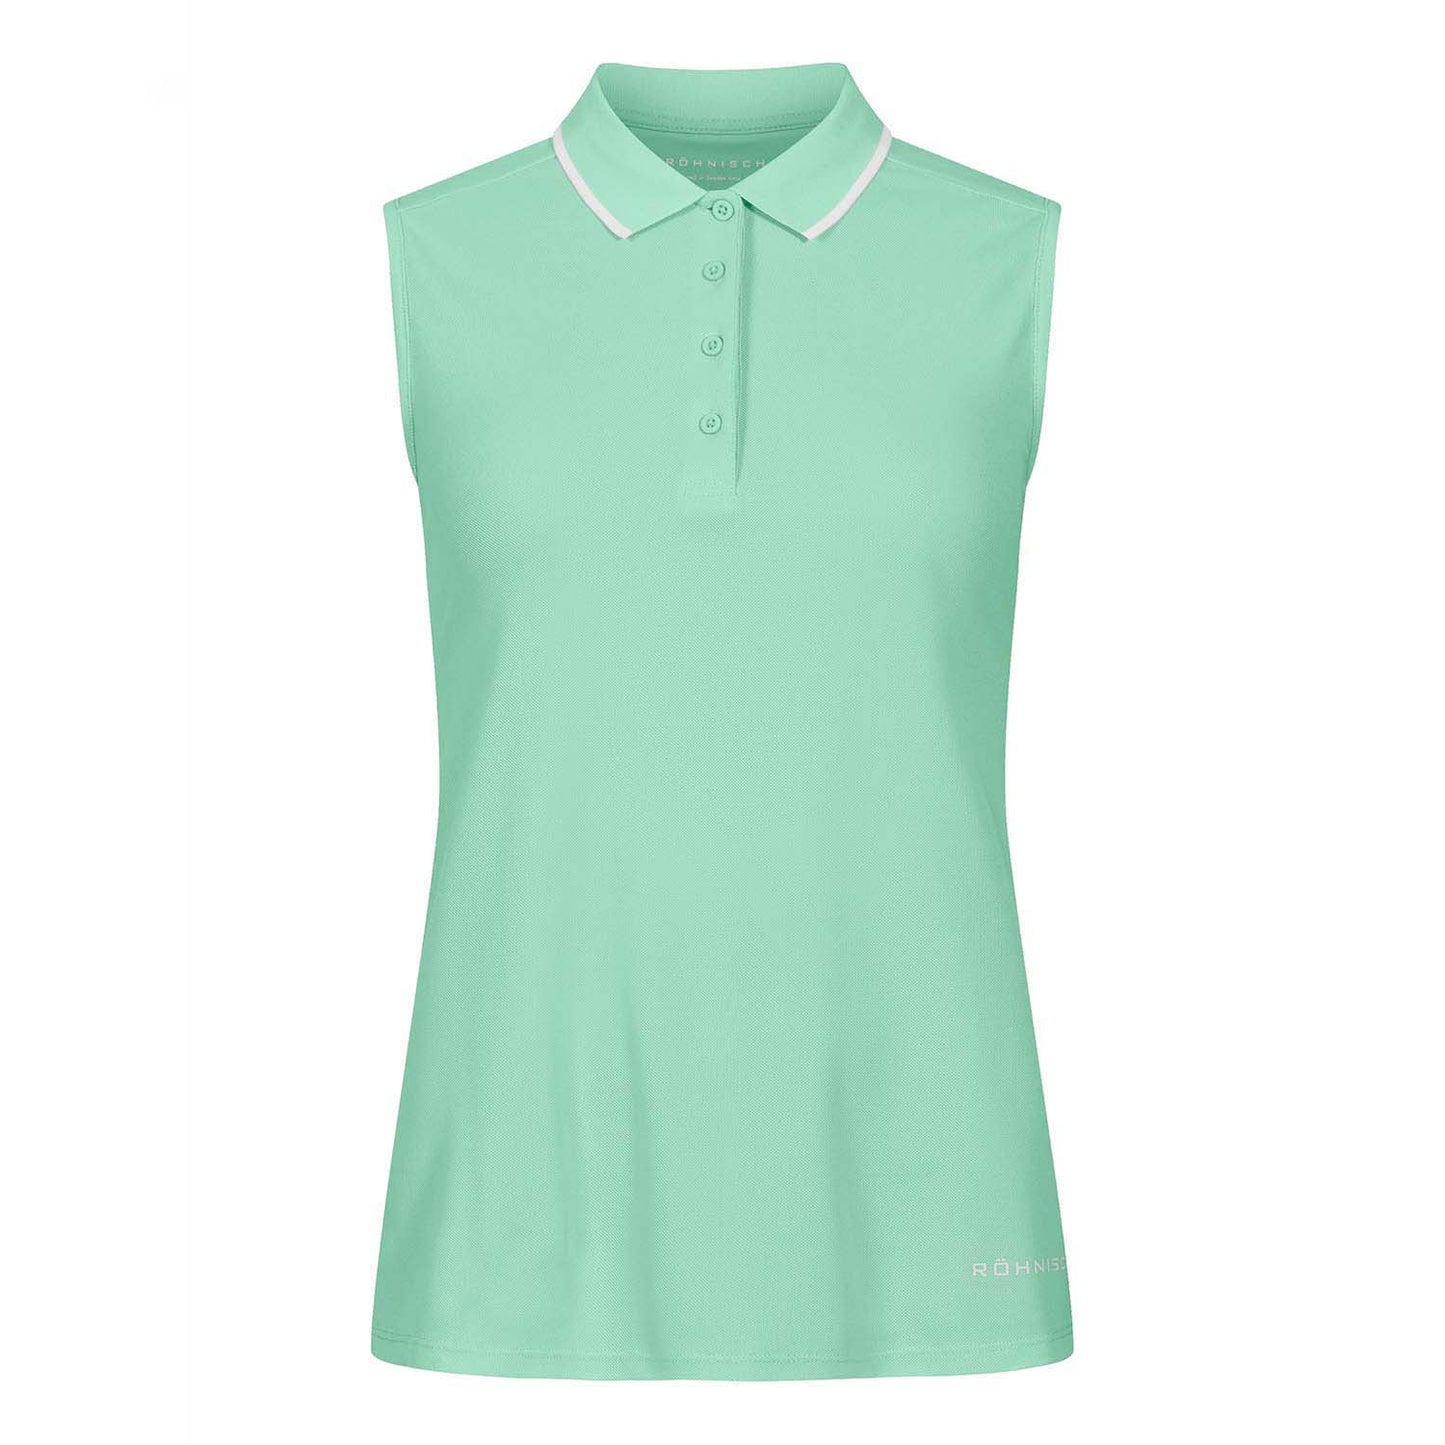 Rohnisch Ladies Classic Sleeveless Polo with Contrast Trim in Ice Green